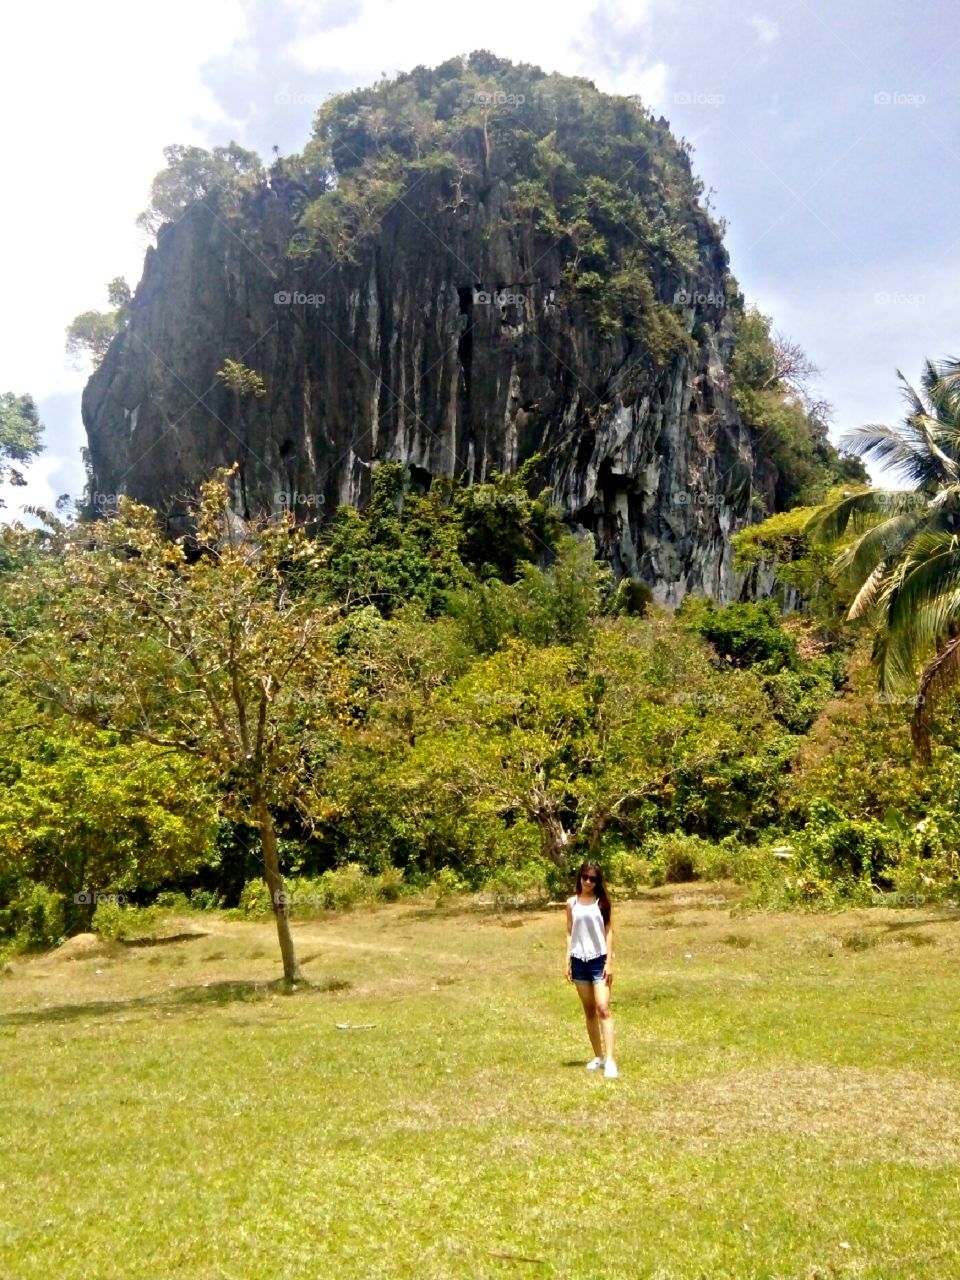 ille Cave in El Nido, Palawan, Philippines